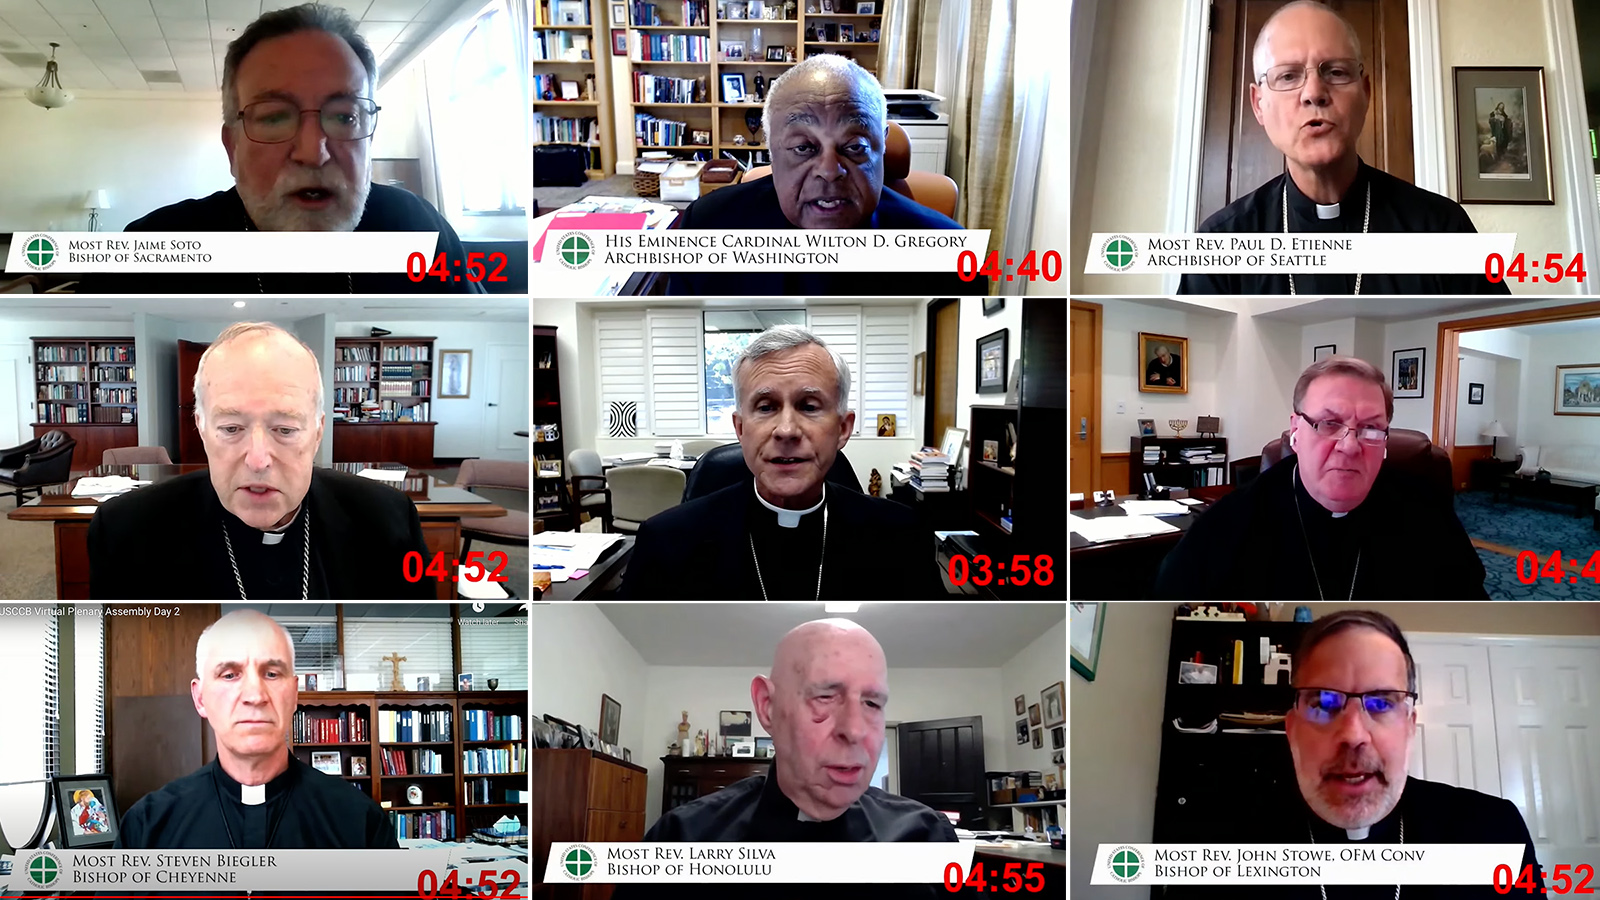 Video screengrabs of clergy participating in the annual spring meeting of the U.S. Conference of Catholic Bishops, Thursday, June 17, 2021. Video screengrabs